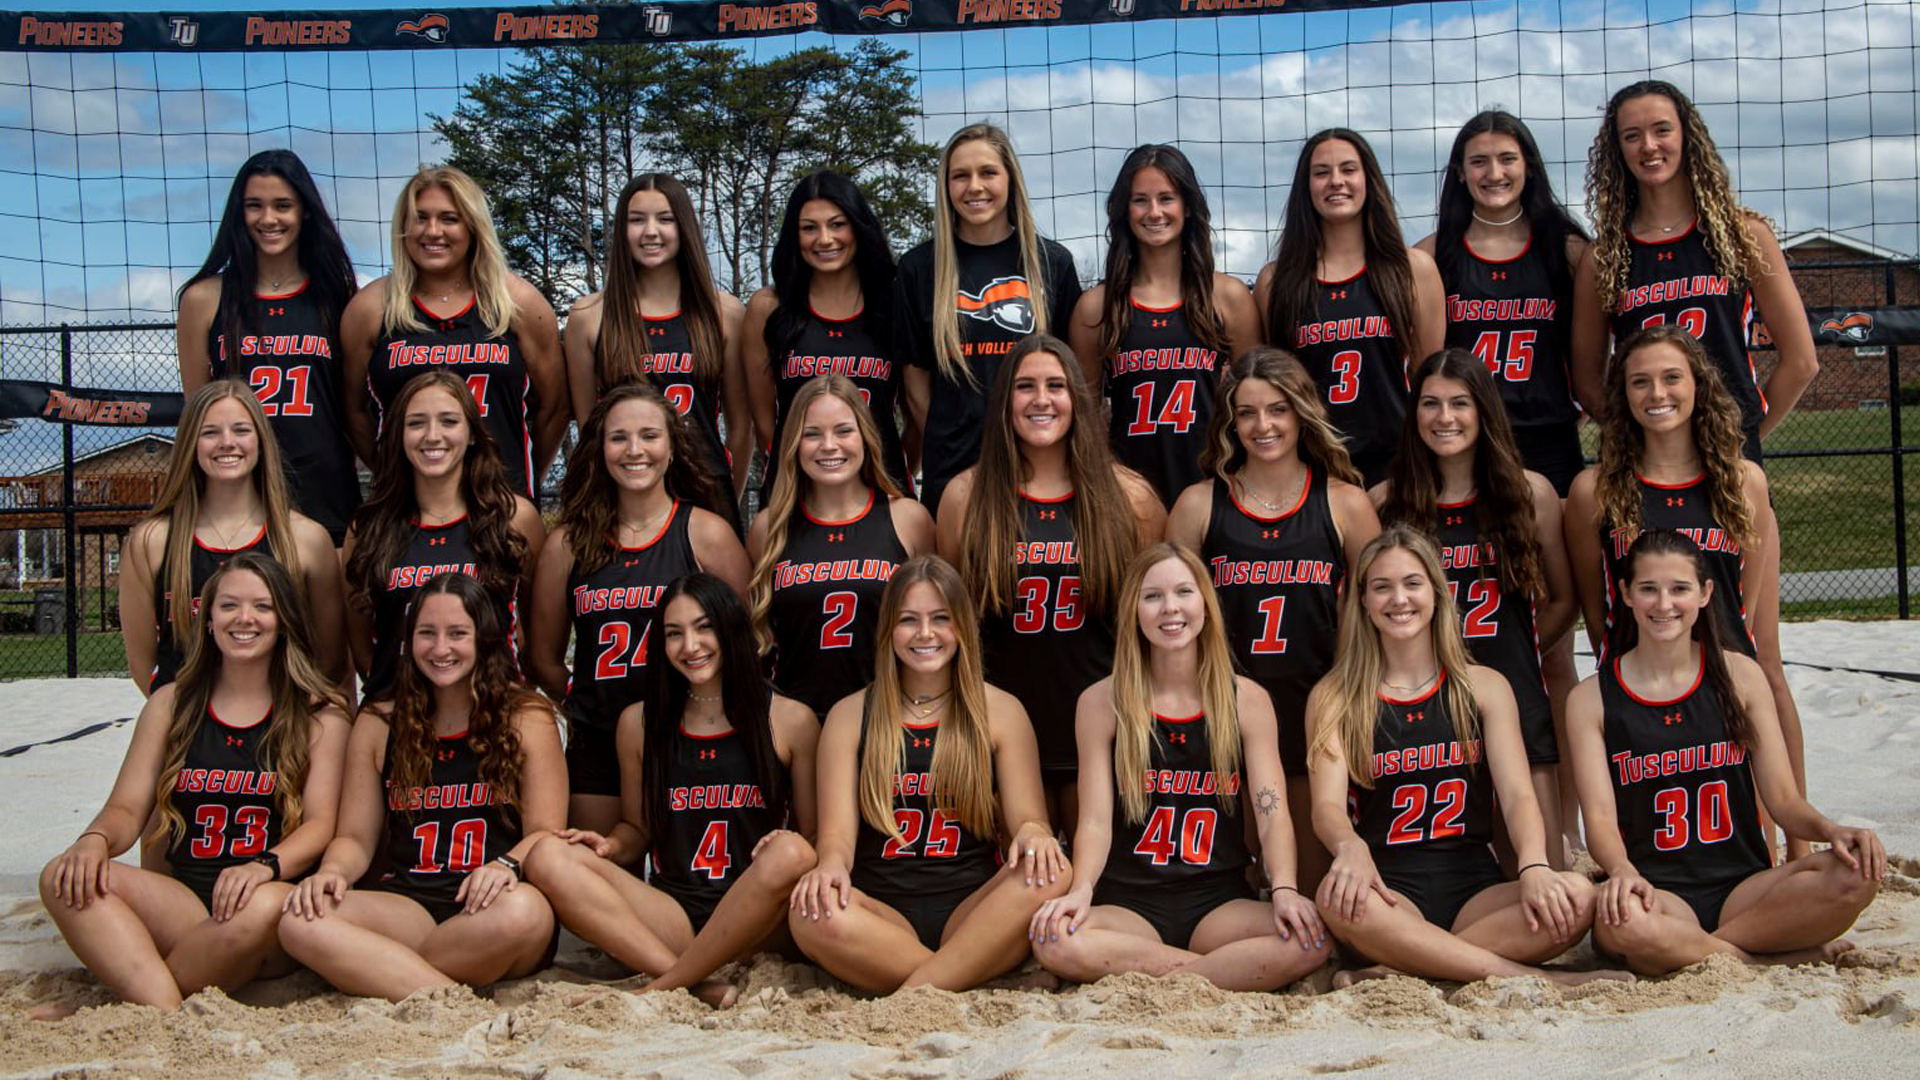 Record-setting season ends with AVCA Bronze Playoff title